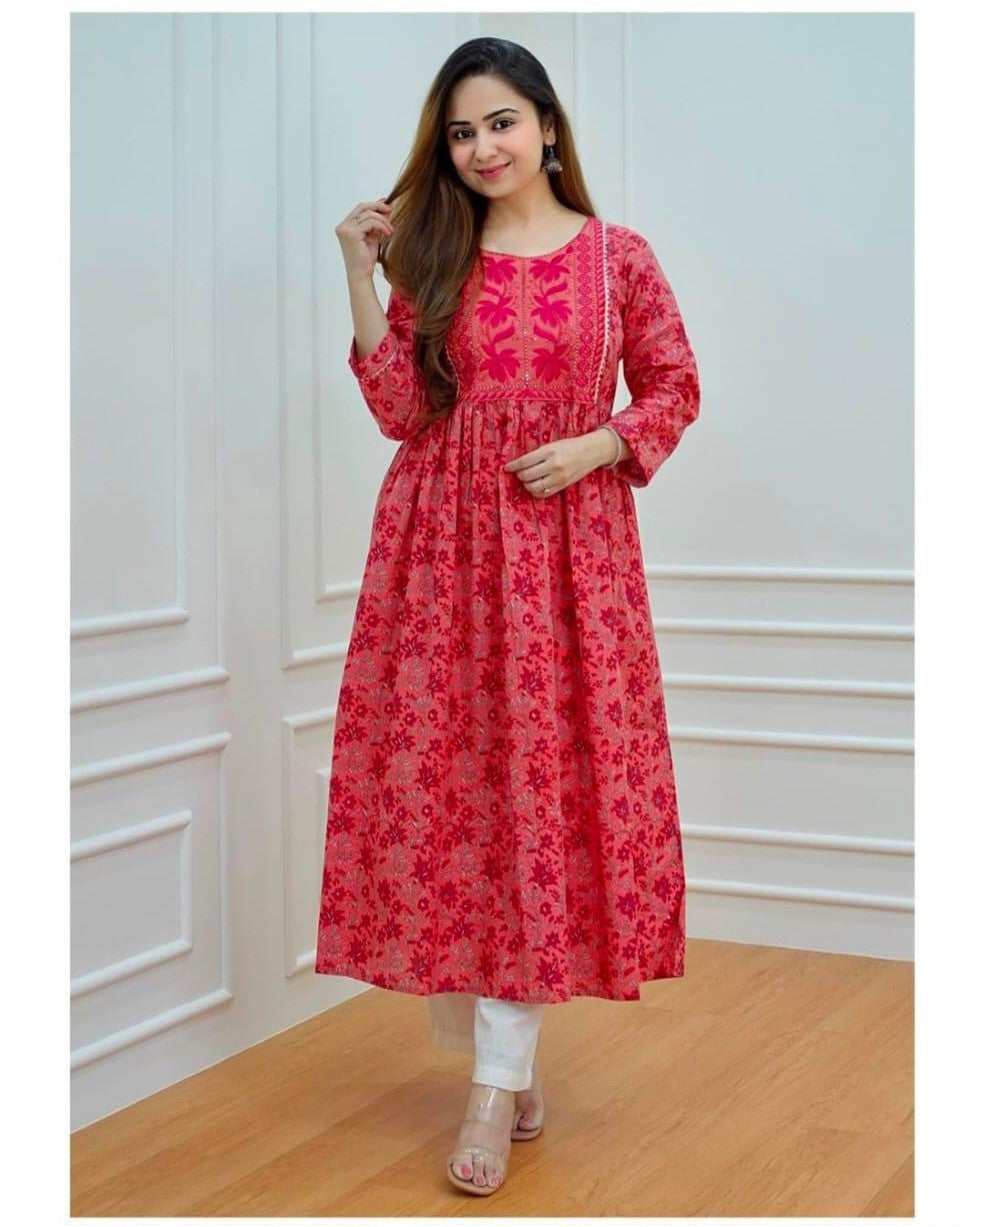 Elegant Red Cotton Anarkali Kurti Set with Exquisite Embroidery